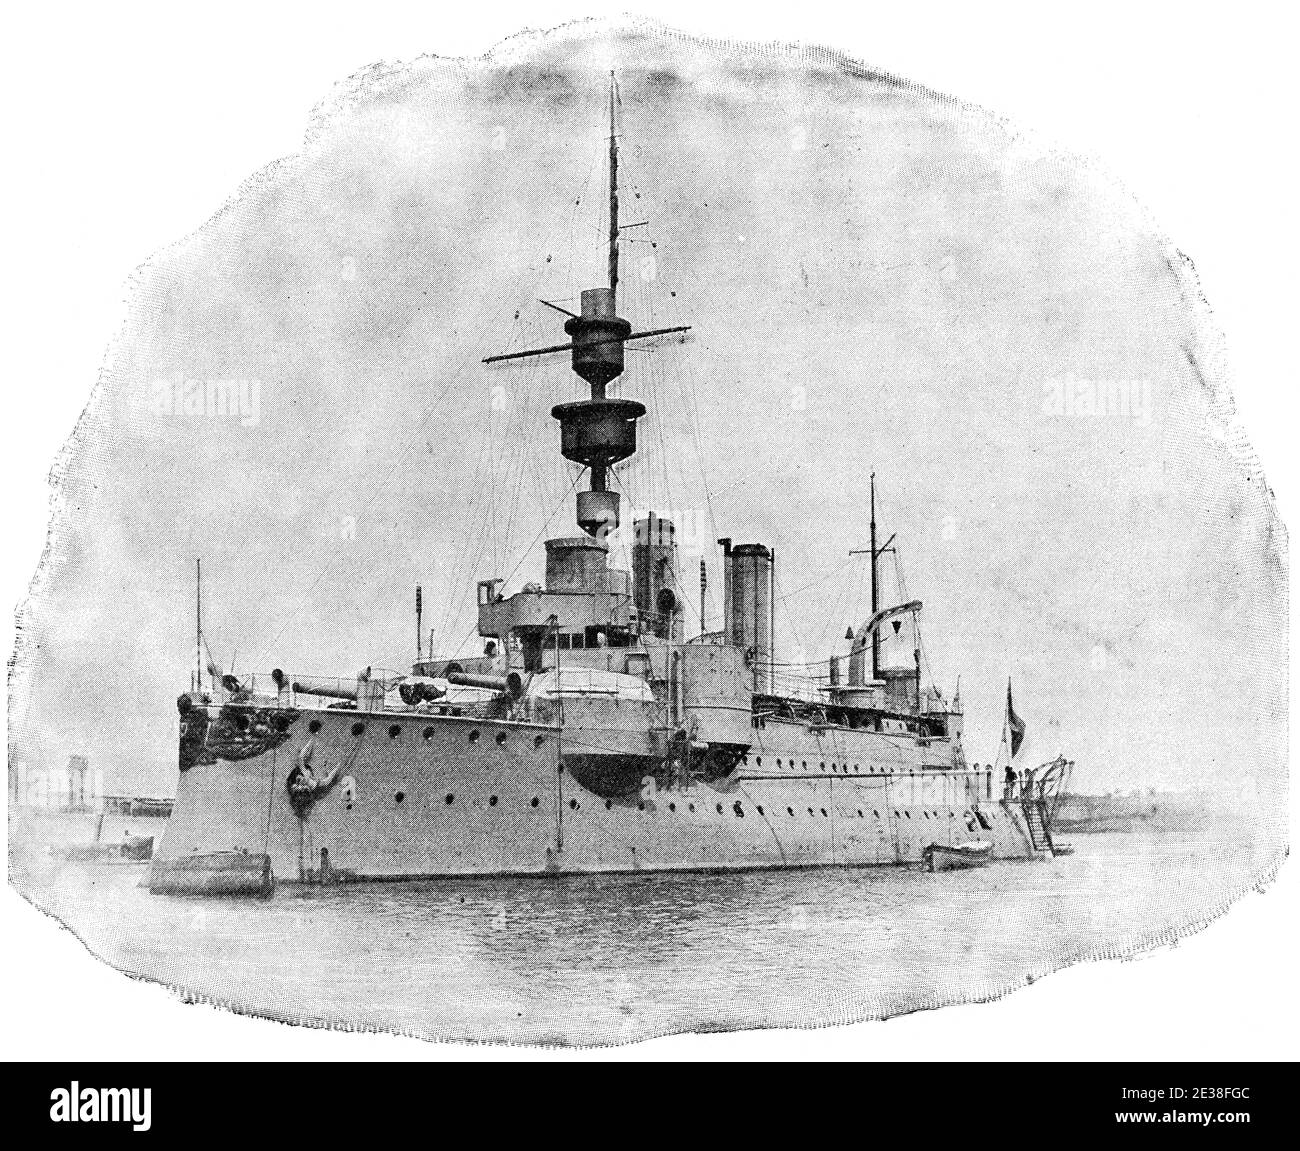 SMS Aegir (1895) - the second and final member of the Odin class of coastal defense ships built for the Imperial German Navy. Illustration of the 19th century. Germany. White background. Stock Photo